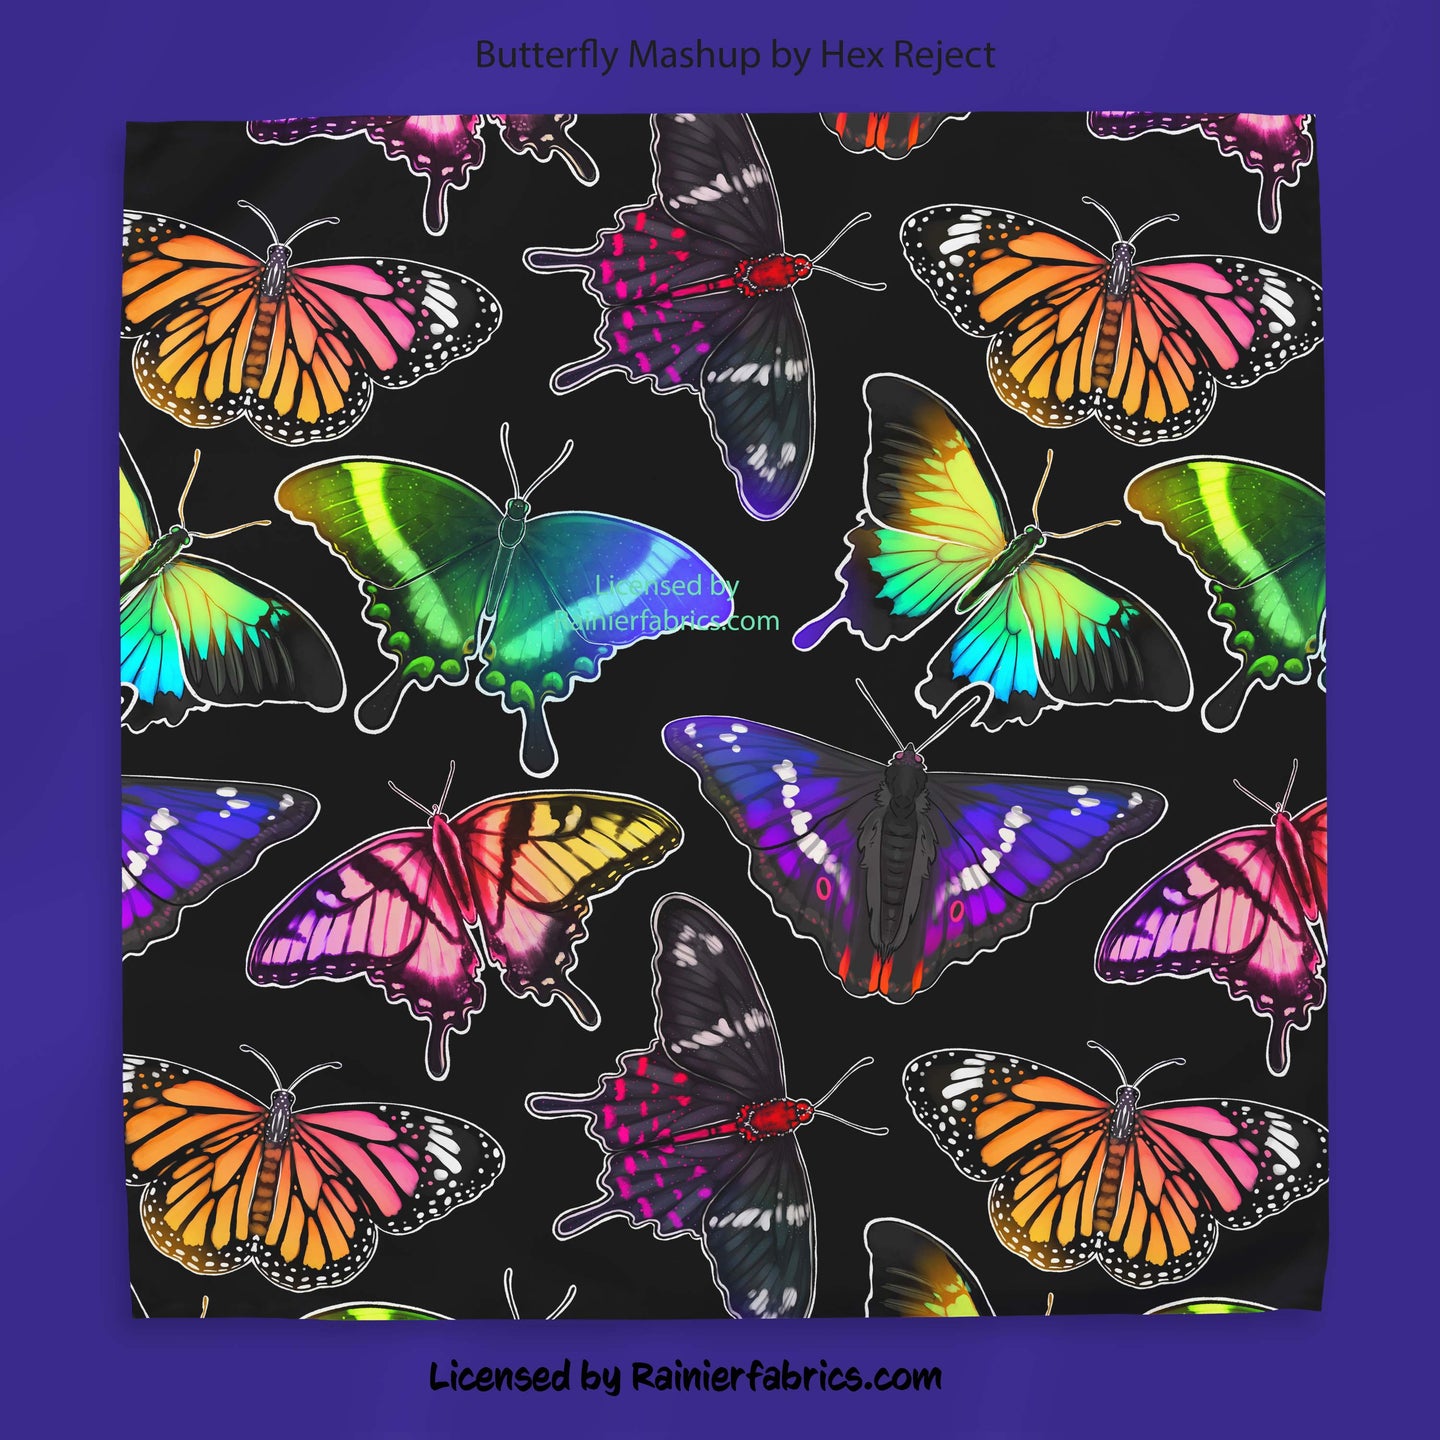 Butterfly Mashup by Hex Reject - 2-5 business days to ship - Order by 1/2 yard